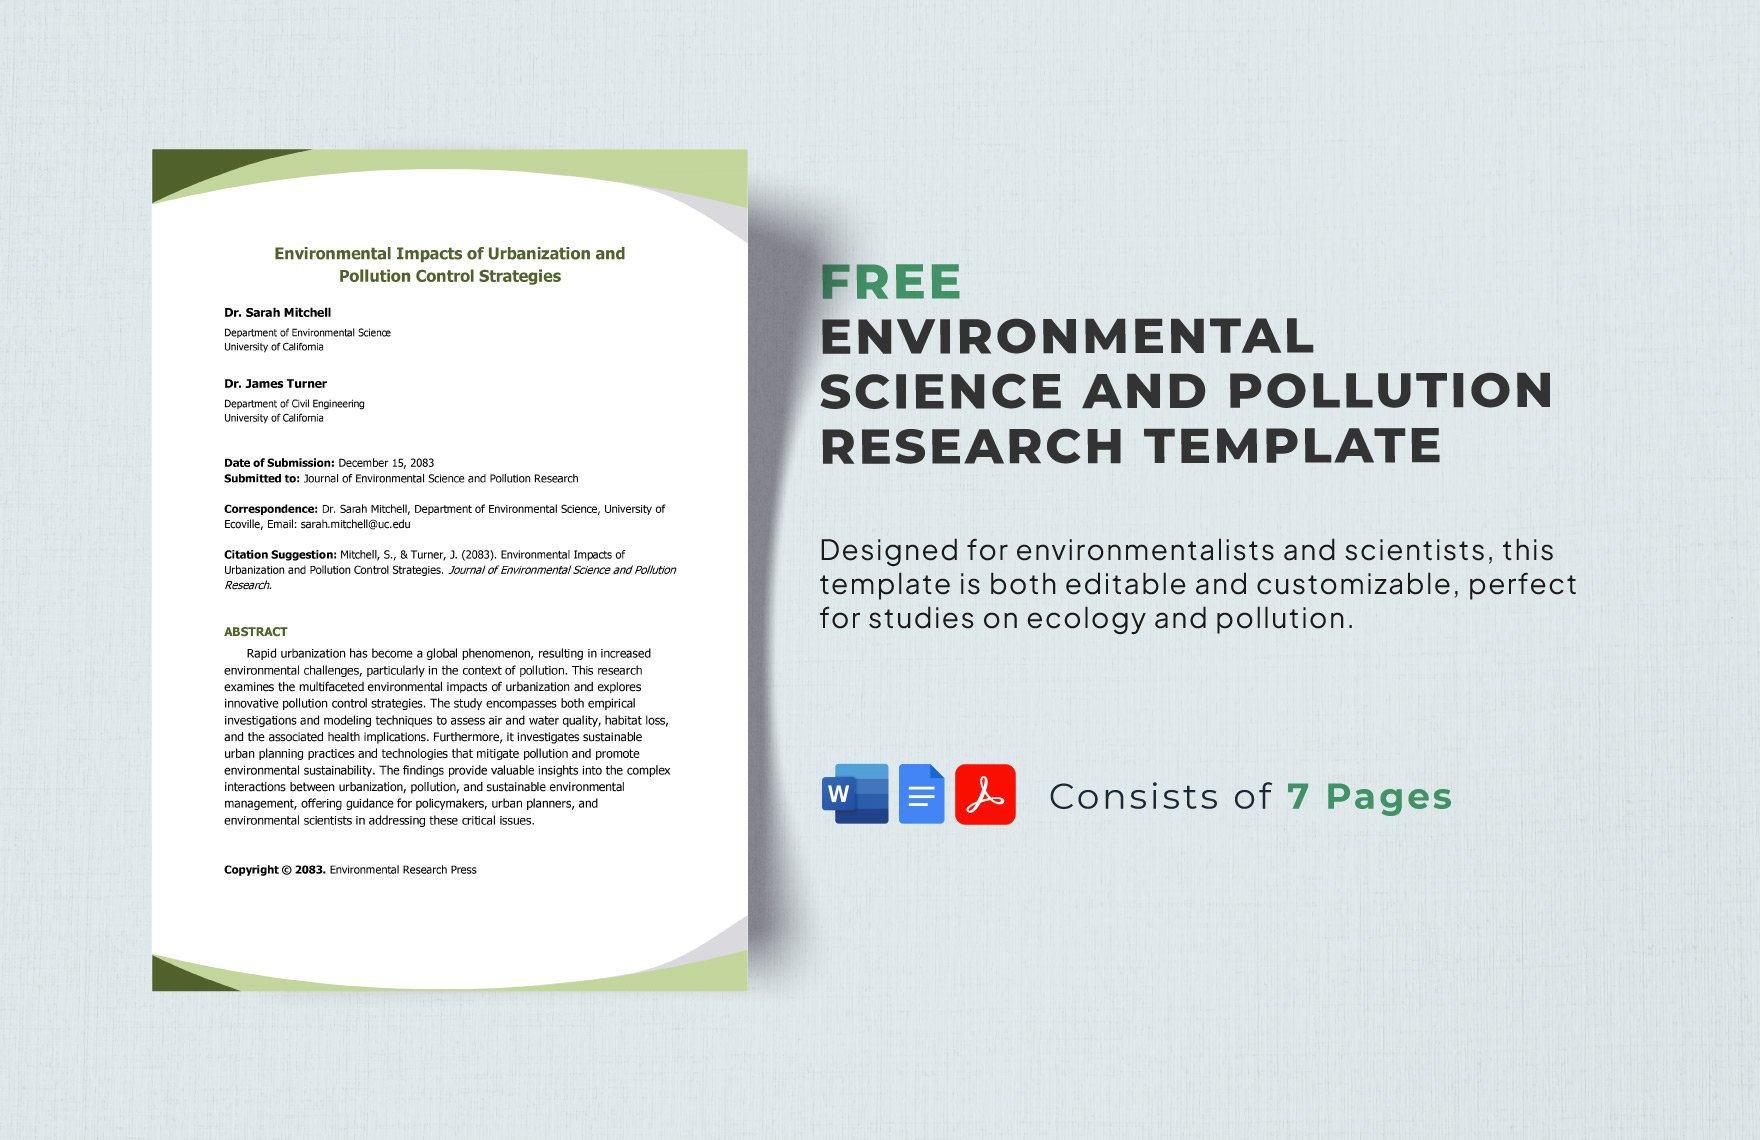 Free Environmental Science and Pollution Research Template in Word, Google Docs, PDF